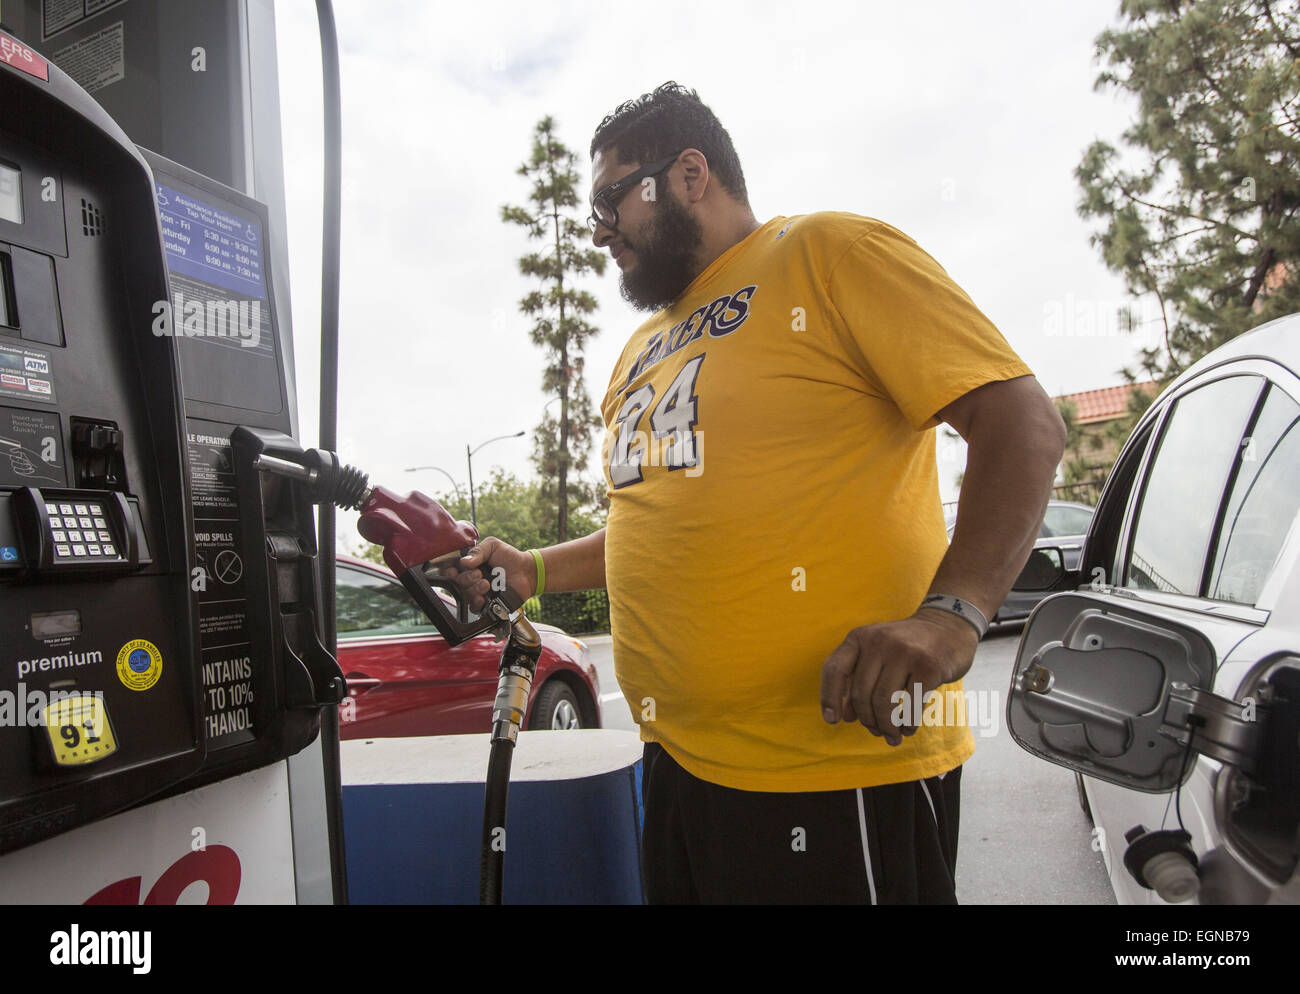 Feb. 27, 2015 - Los Angeles, California, U.S - A man fills up his car at a gasoline station in Los Angeles on Friday February 27, 2015. The average price of a gallon of self-serve regular gasoline in Los Angeles County today recorded its largest daily increase since.Oct. 6, 2012, rising 12.1 cents to $3.396, its highest amount since Oct. 28. The average price has increased 28 consecutive days, rising 90.7 cents, including 8 cents on Thursday, according to figures from the AAA and Oil Price.Information Service. (Credit Image: © Ringo Chiu/ZUMA Wire) Stock Photo